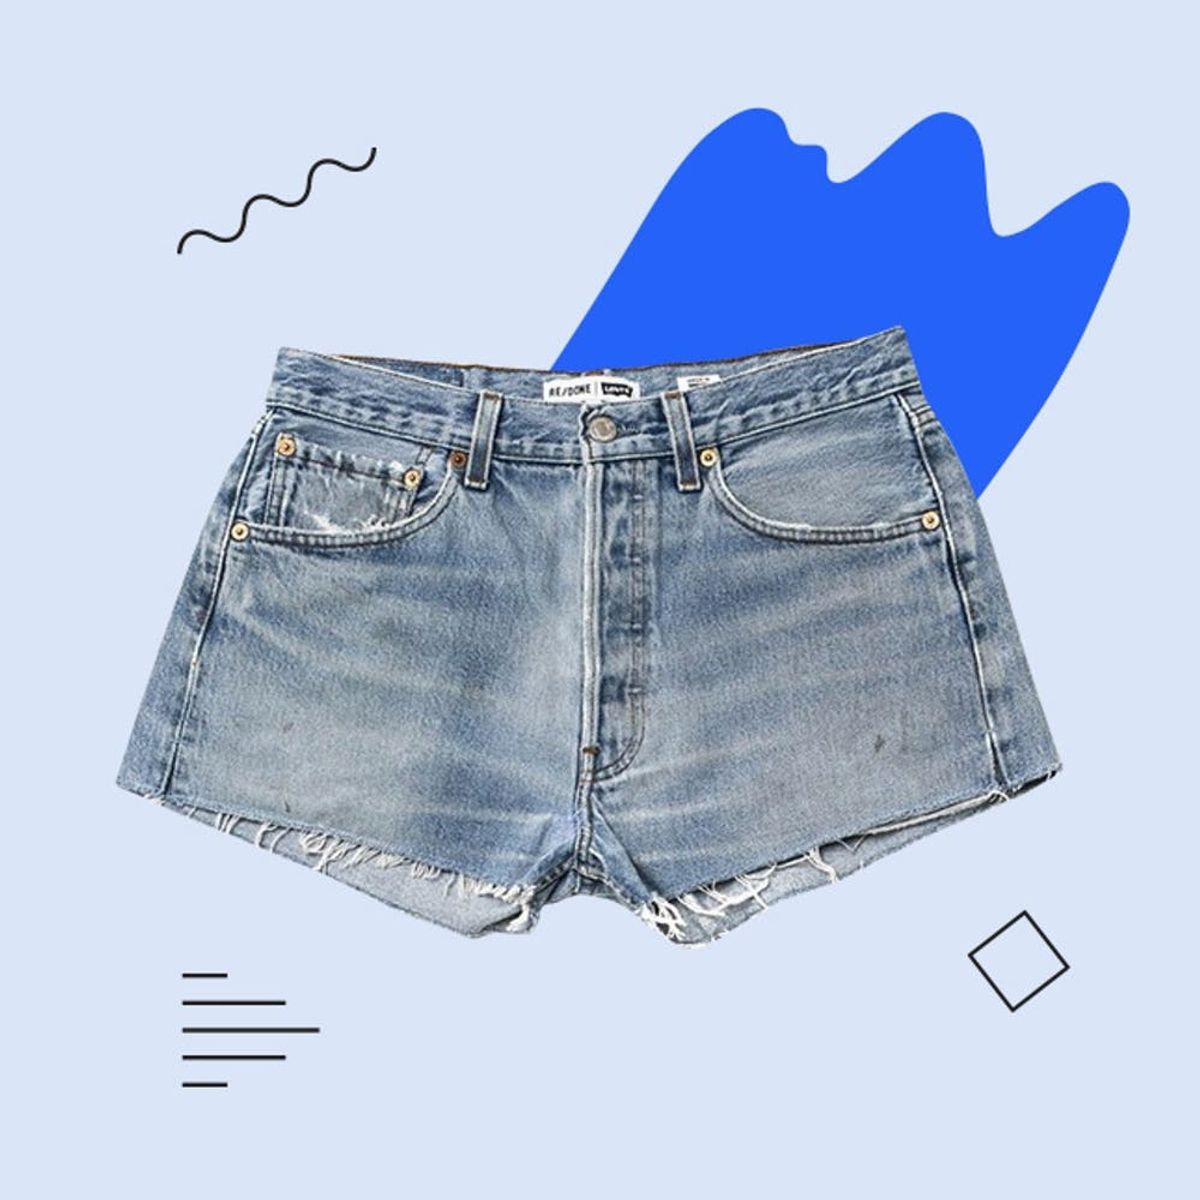 5 Easy Ways to Make Denim Shorts Look Sophisticated